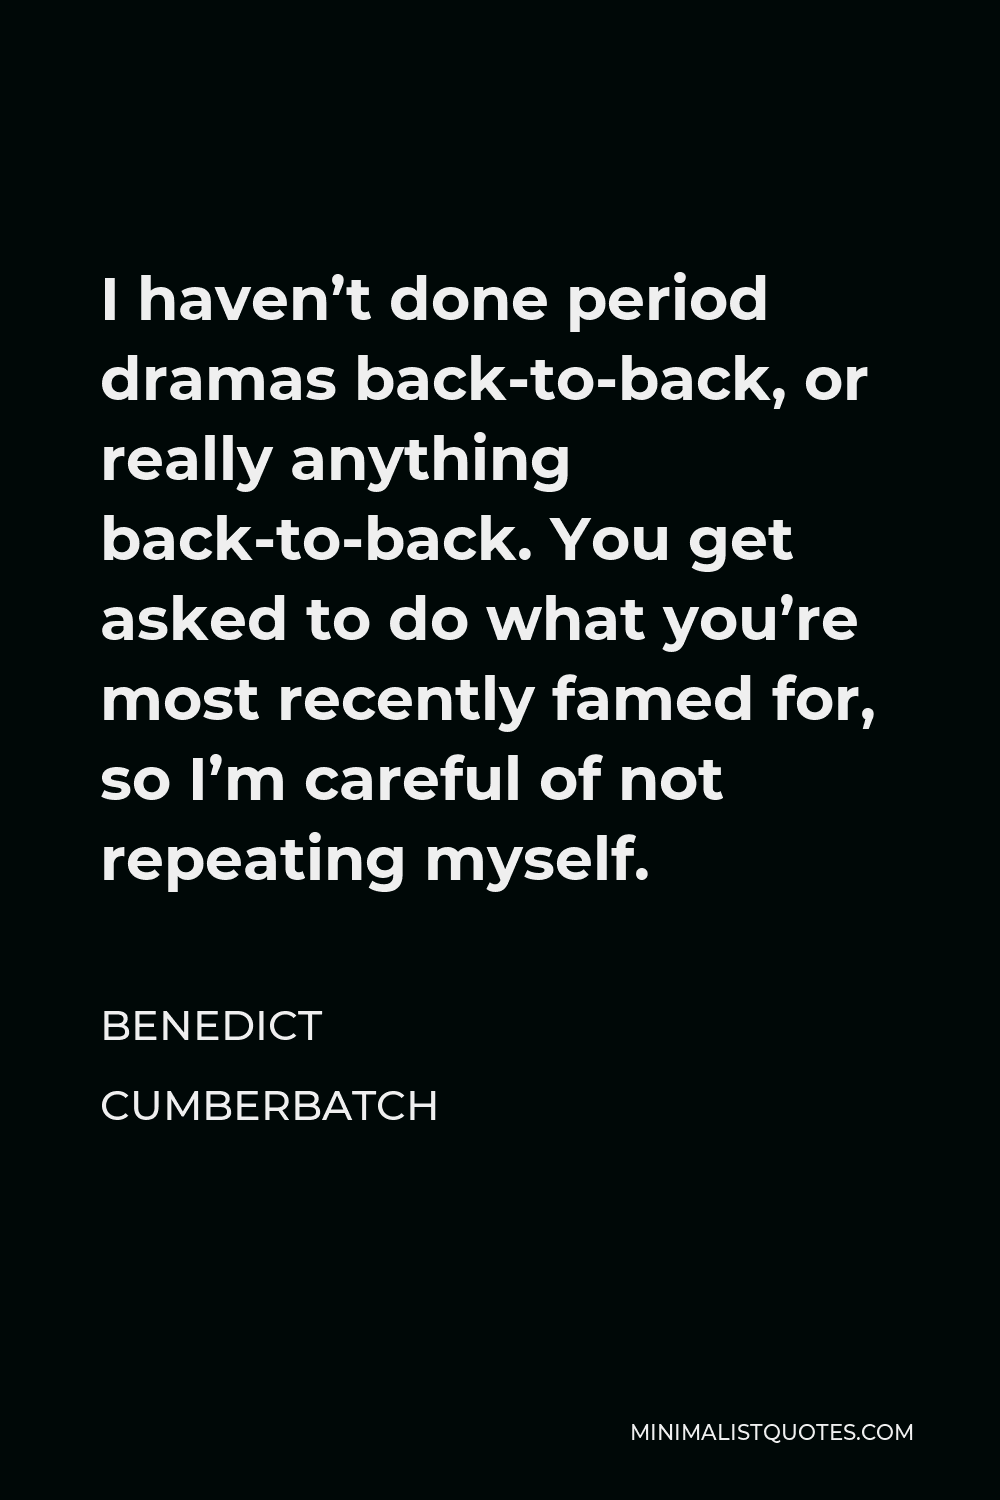 Benedict Cumberbatch Quote - I haven’t done period dramas back-to-back, or really anything back-to-back. You get asked to do what you’re most recently famed for, so I’m careful of not repeating myself.